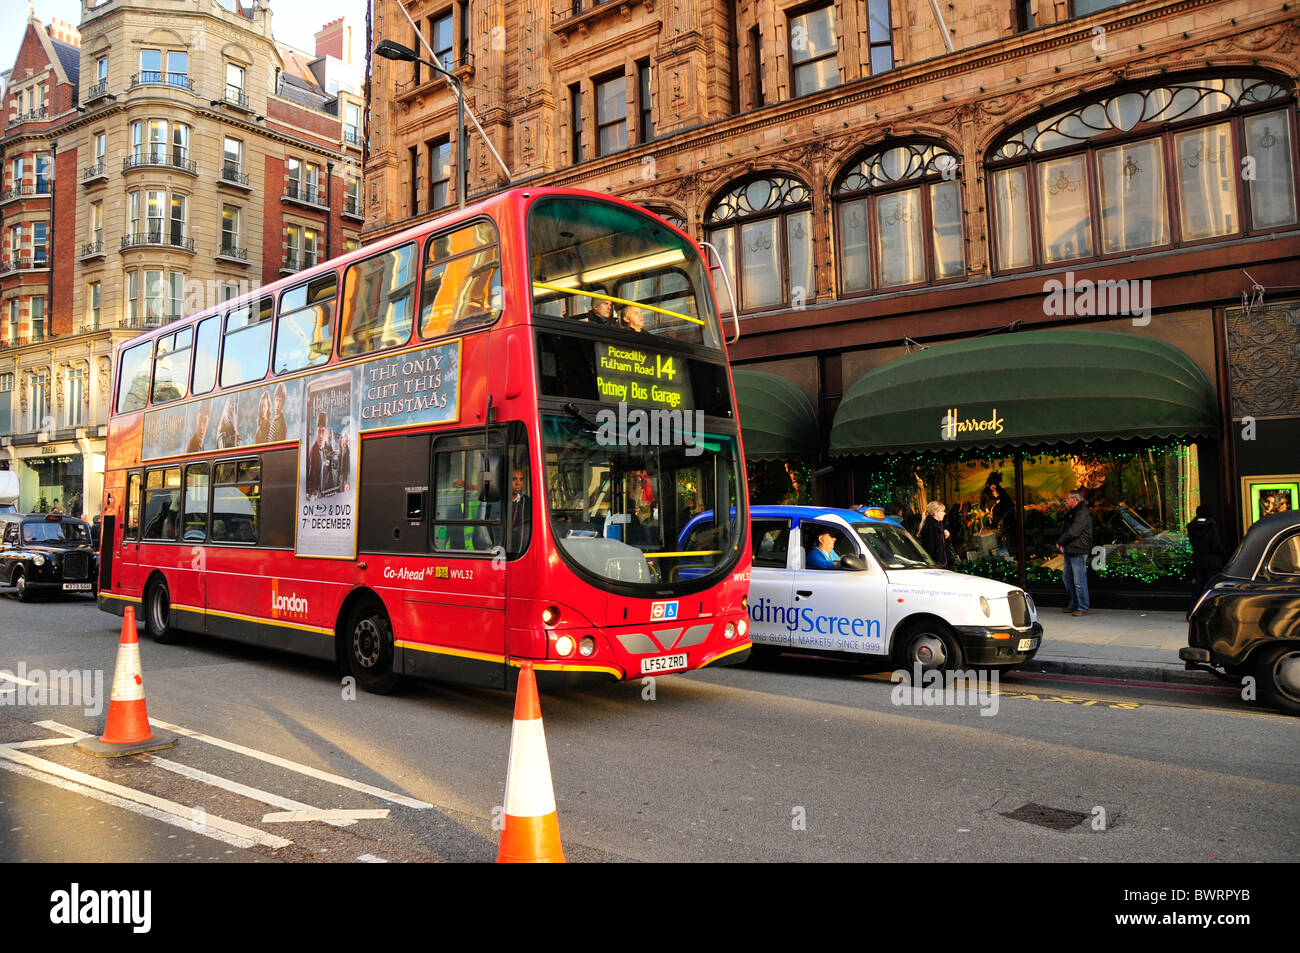 Red double-decker bus in front of the high-class department store Harrods, London, England, United Kingdom, Europe Stock Photo